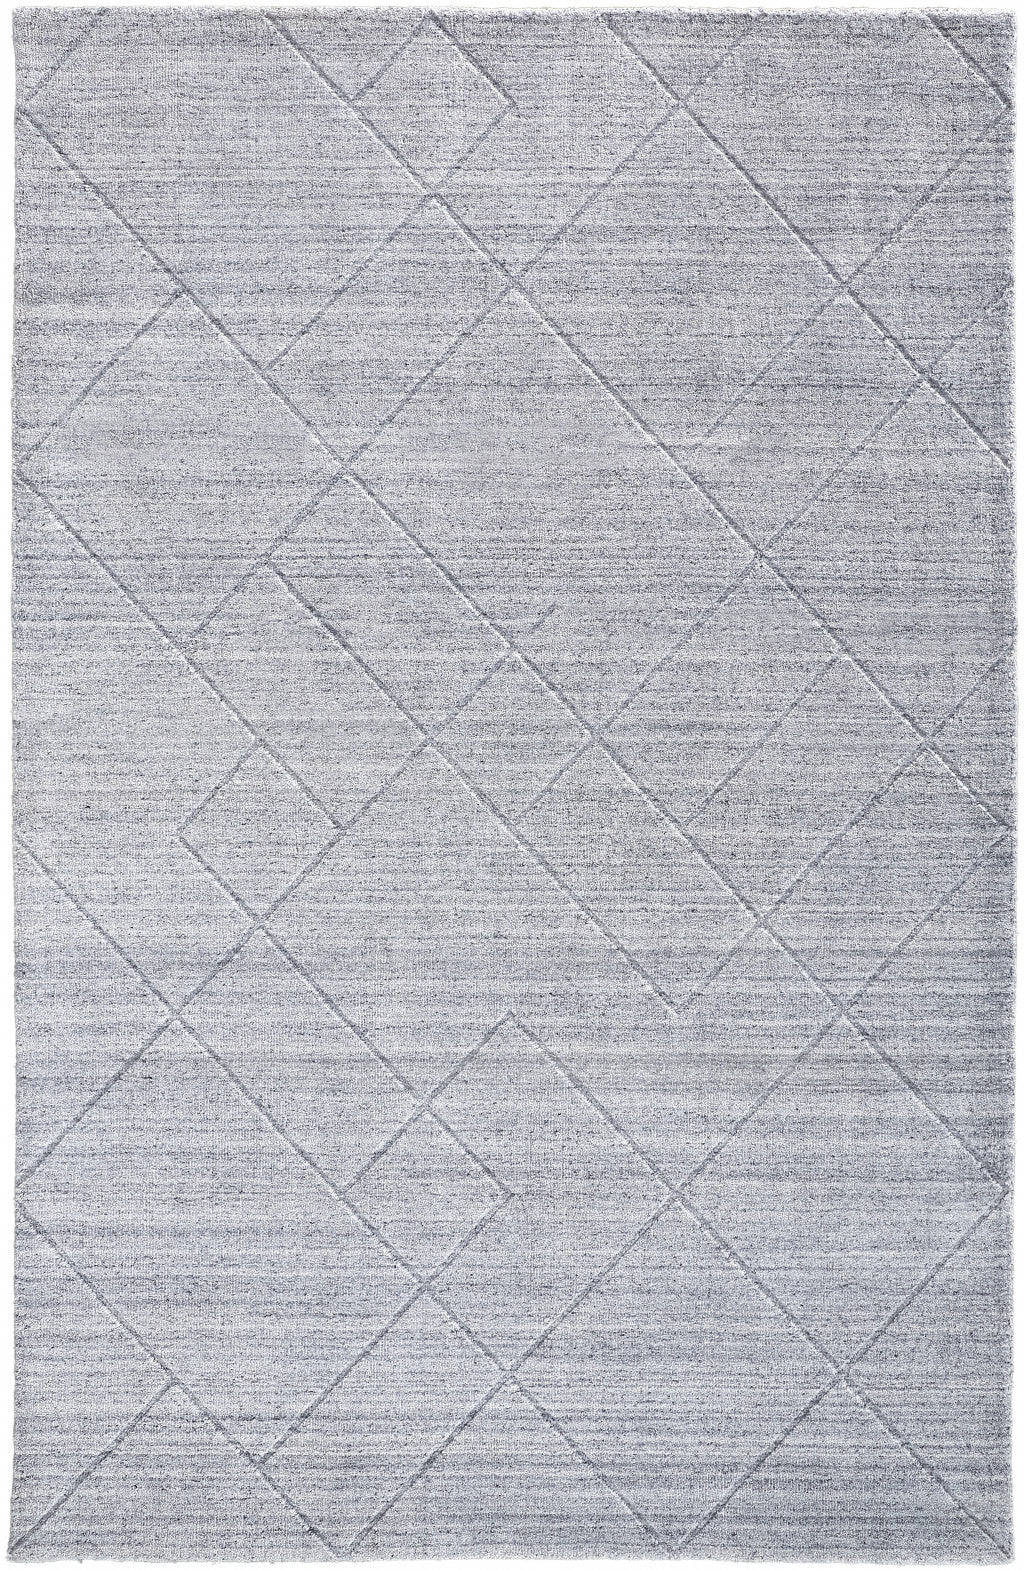 4' X 6' Ivory And Silver Striped Hand Woven Area Rug